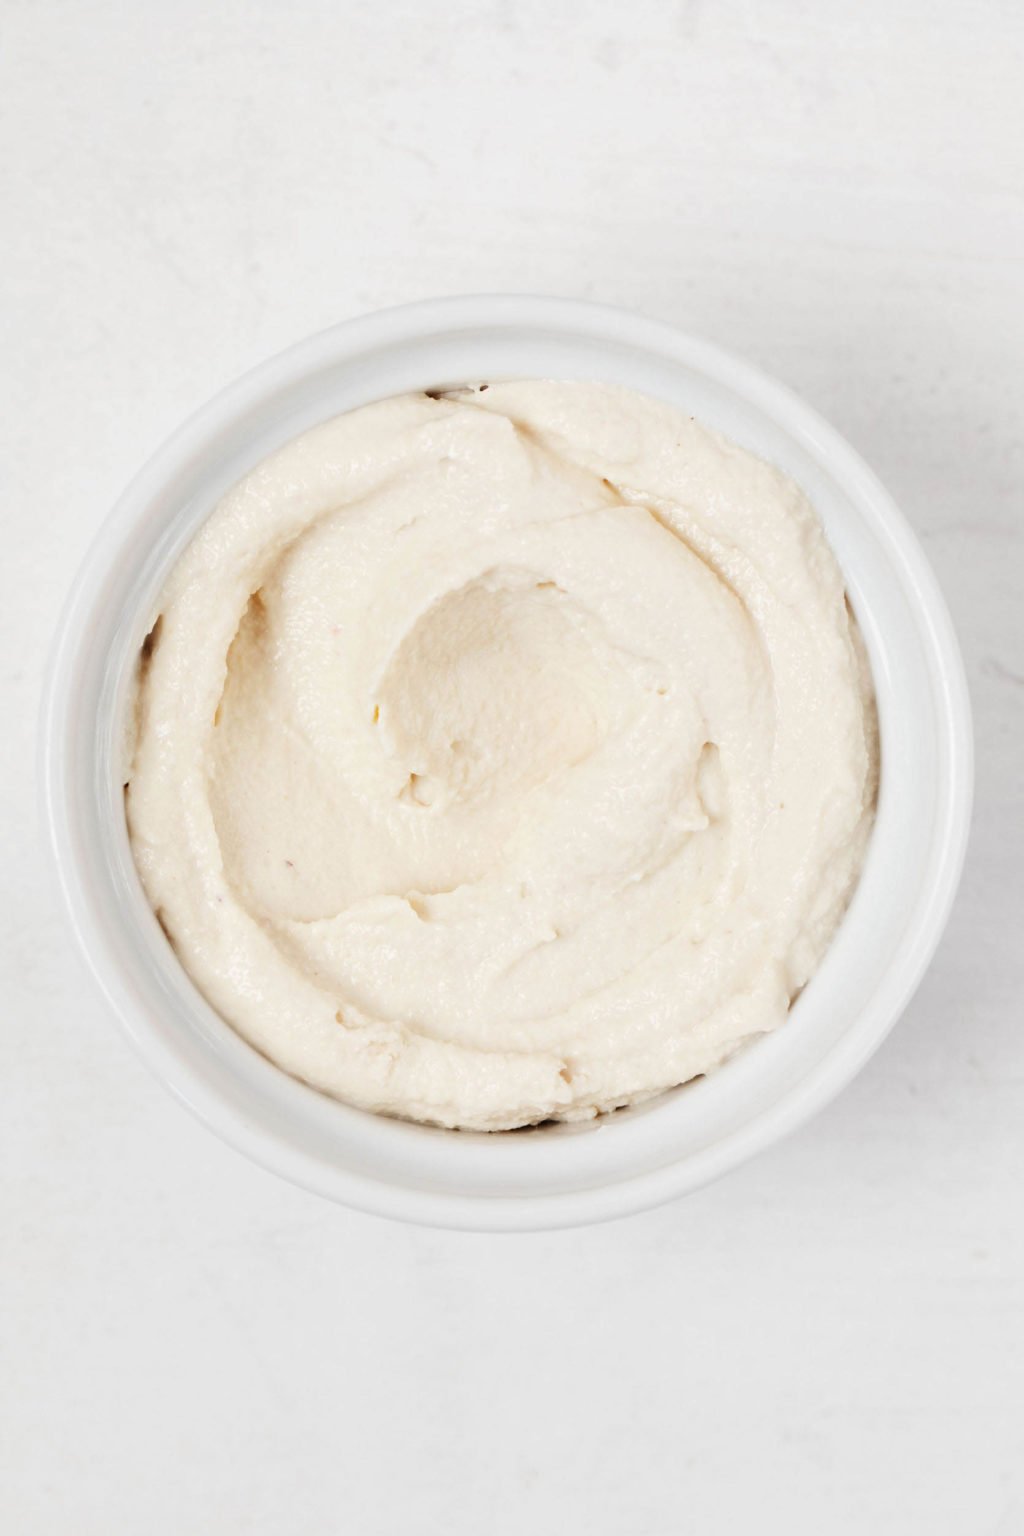 An overhead image of a small, white pinch bowl filled with vegan ricotta cheese.